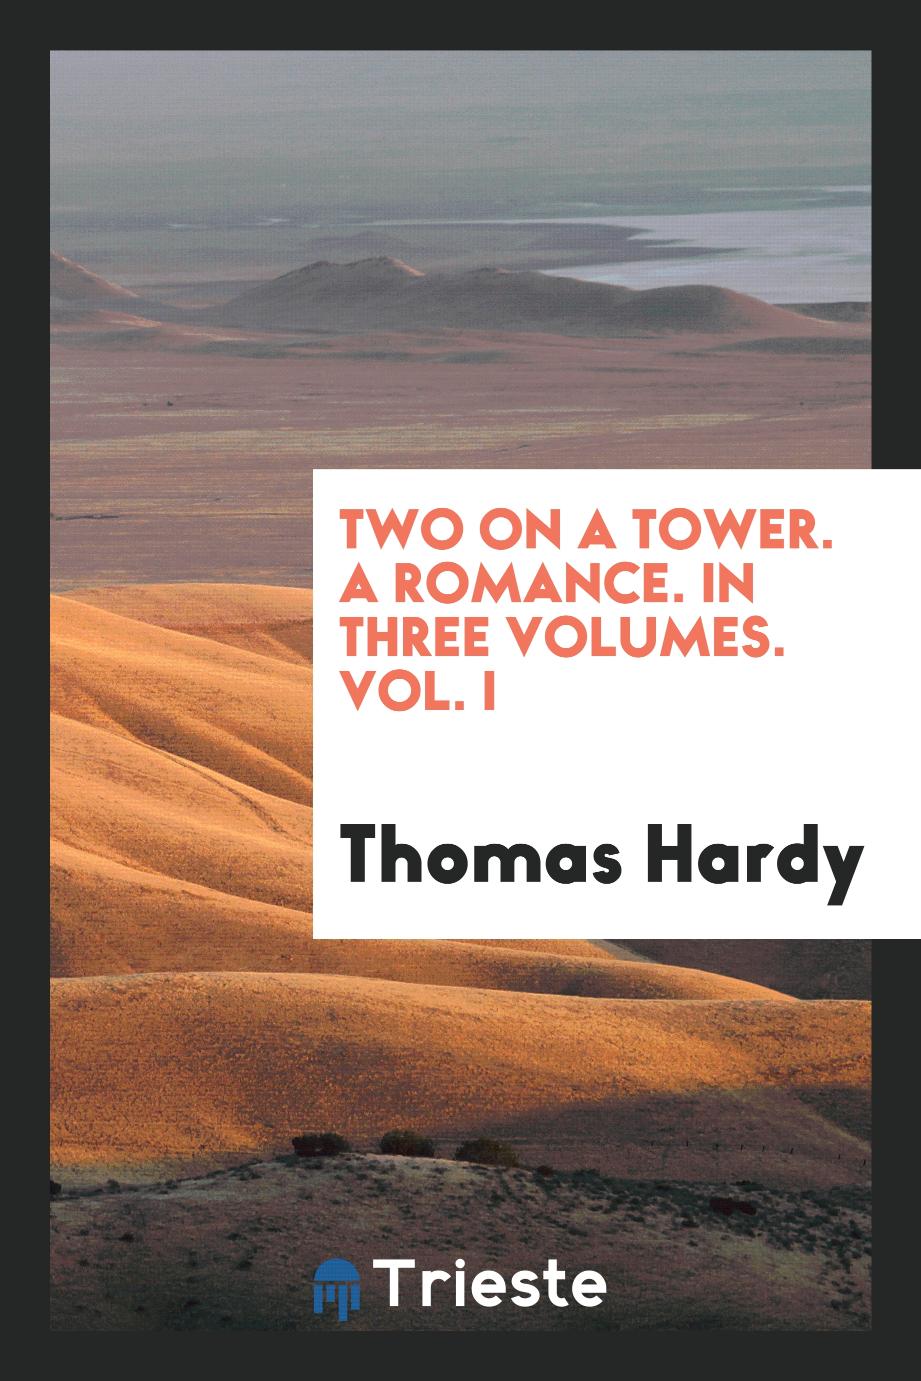 Two on a Tower. A Romance. In Three Volumes. Vol. I